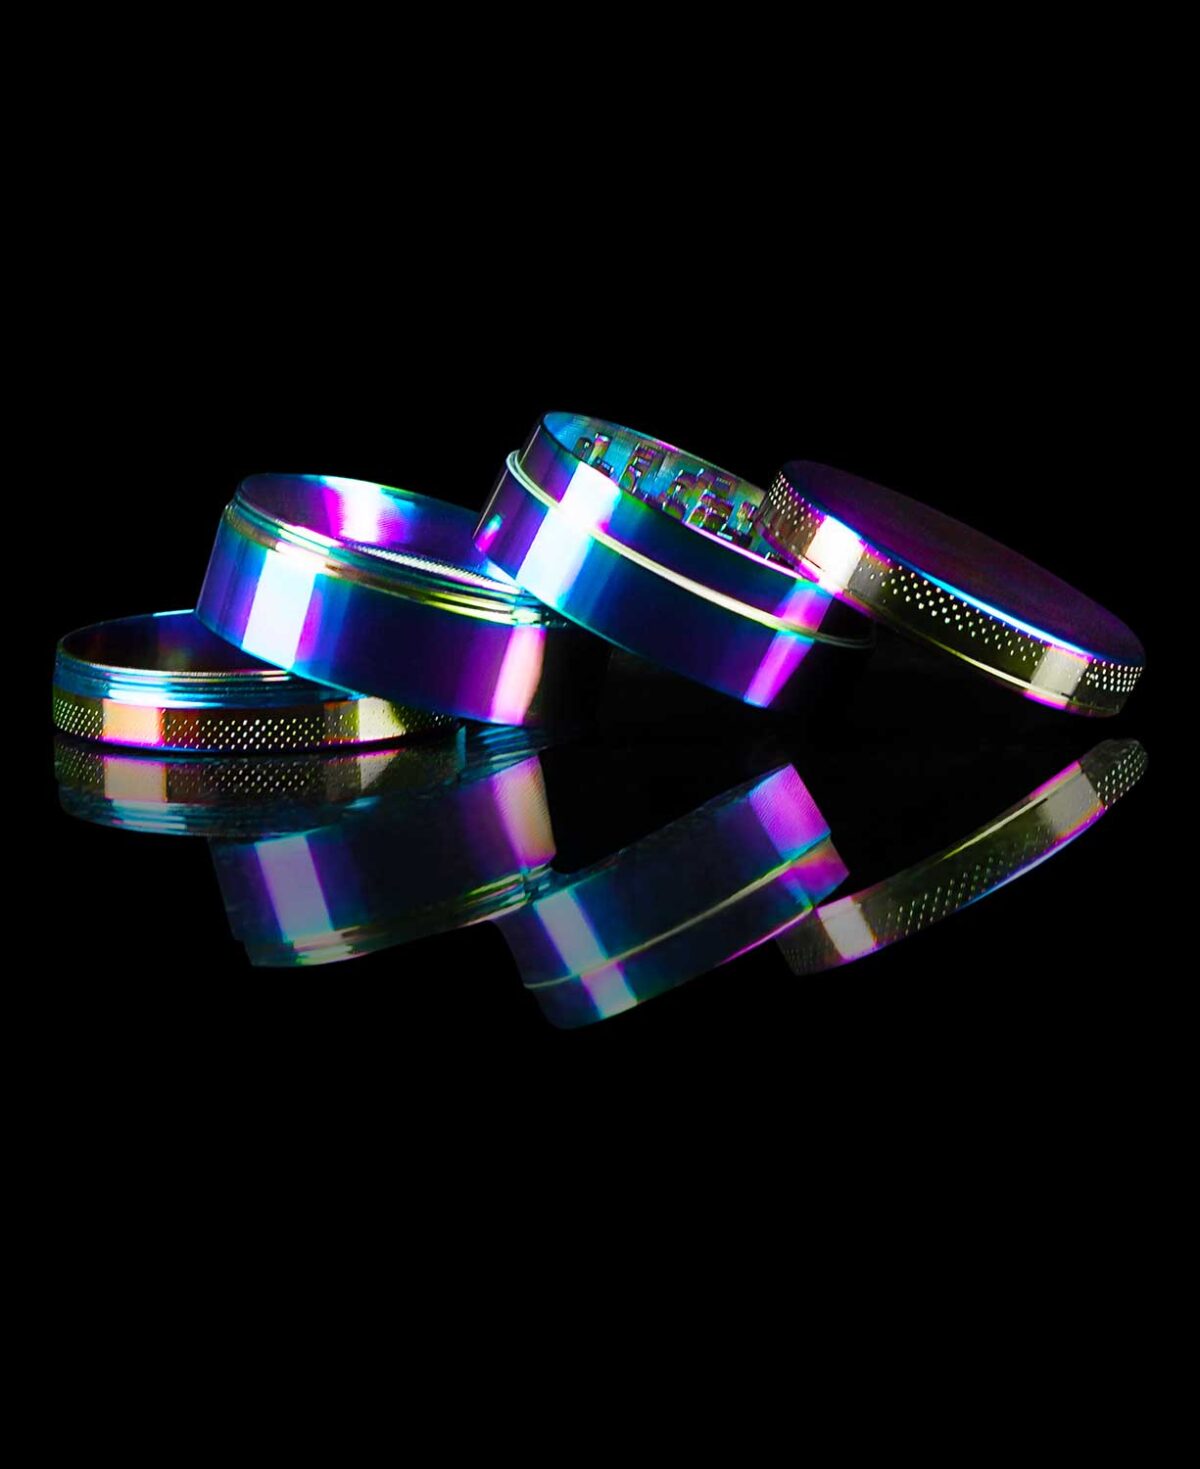 metal grinder with rainbow finish